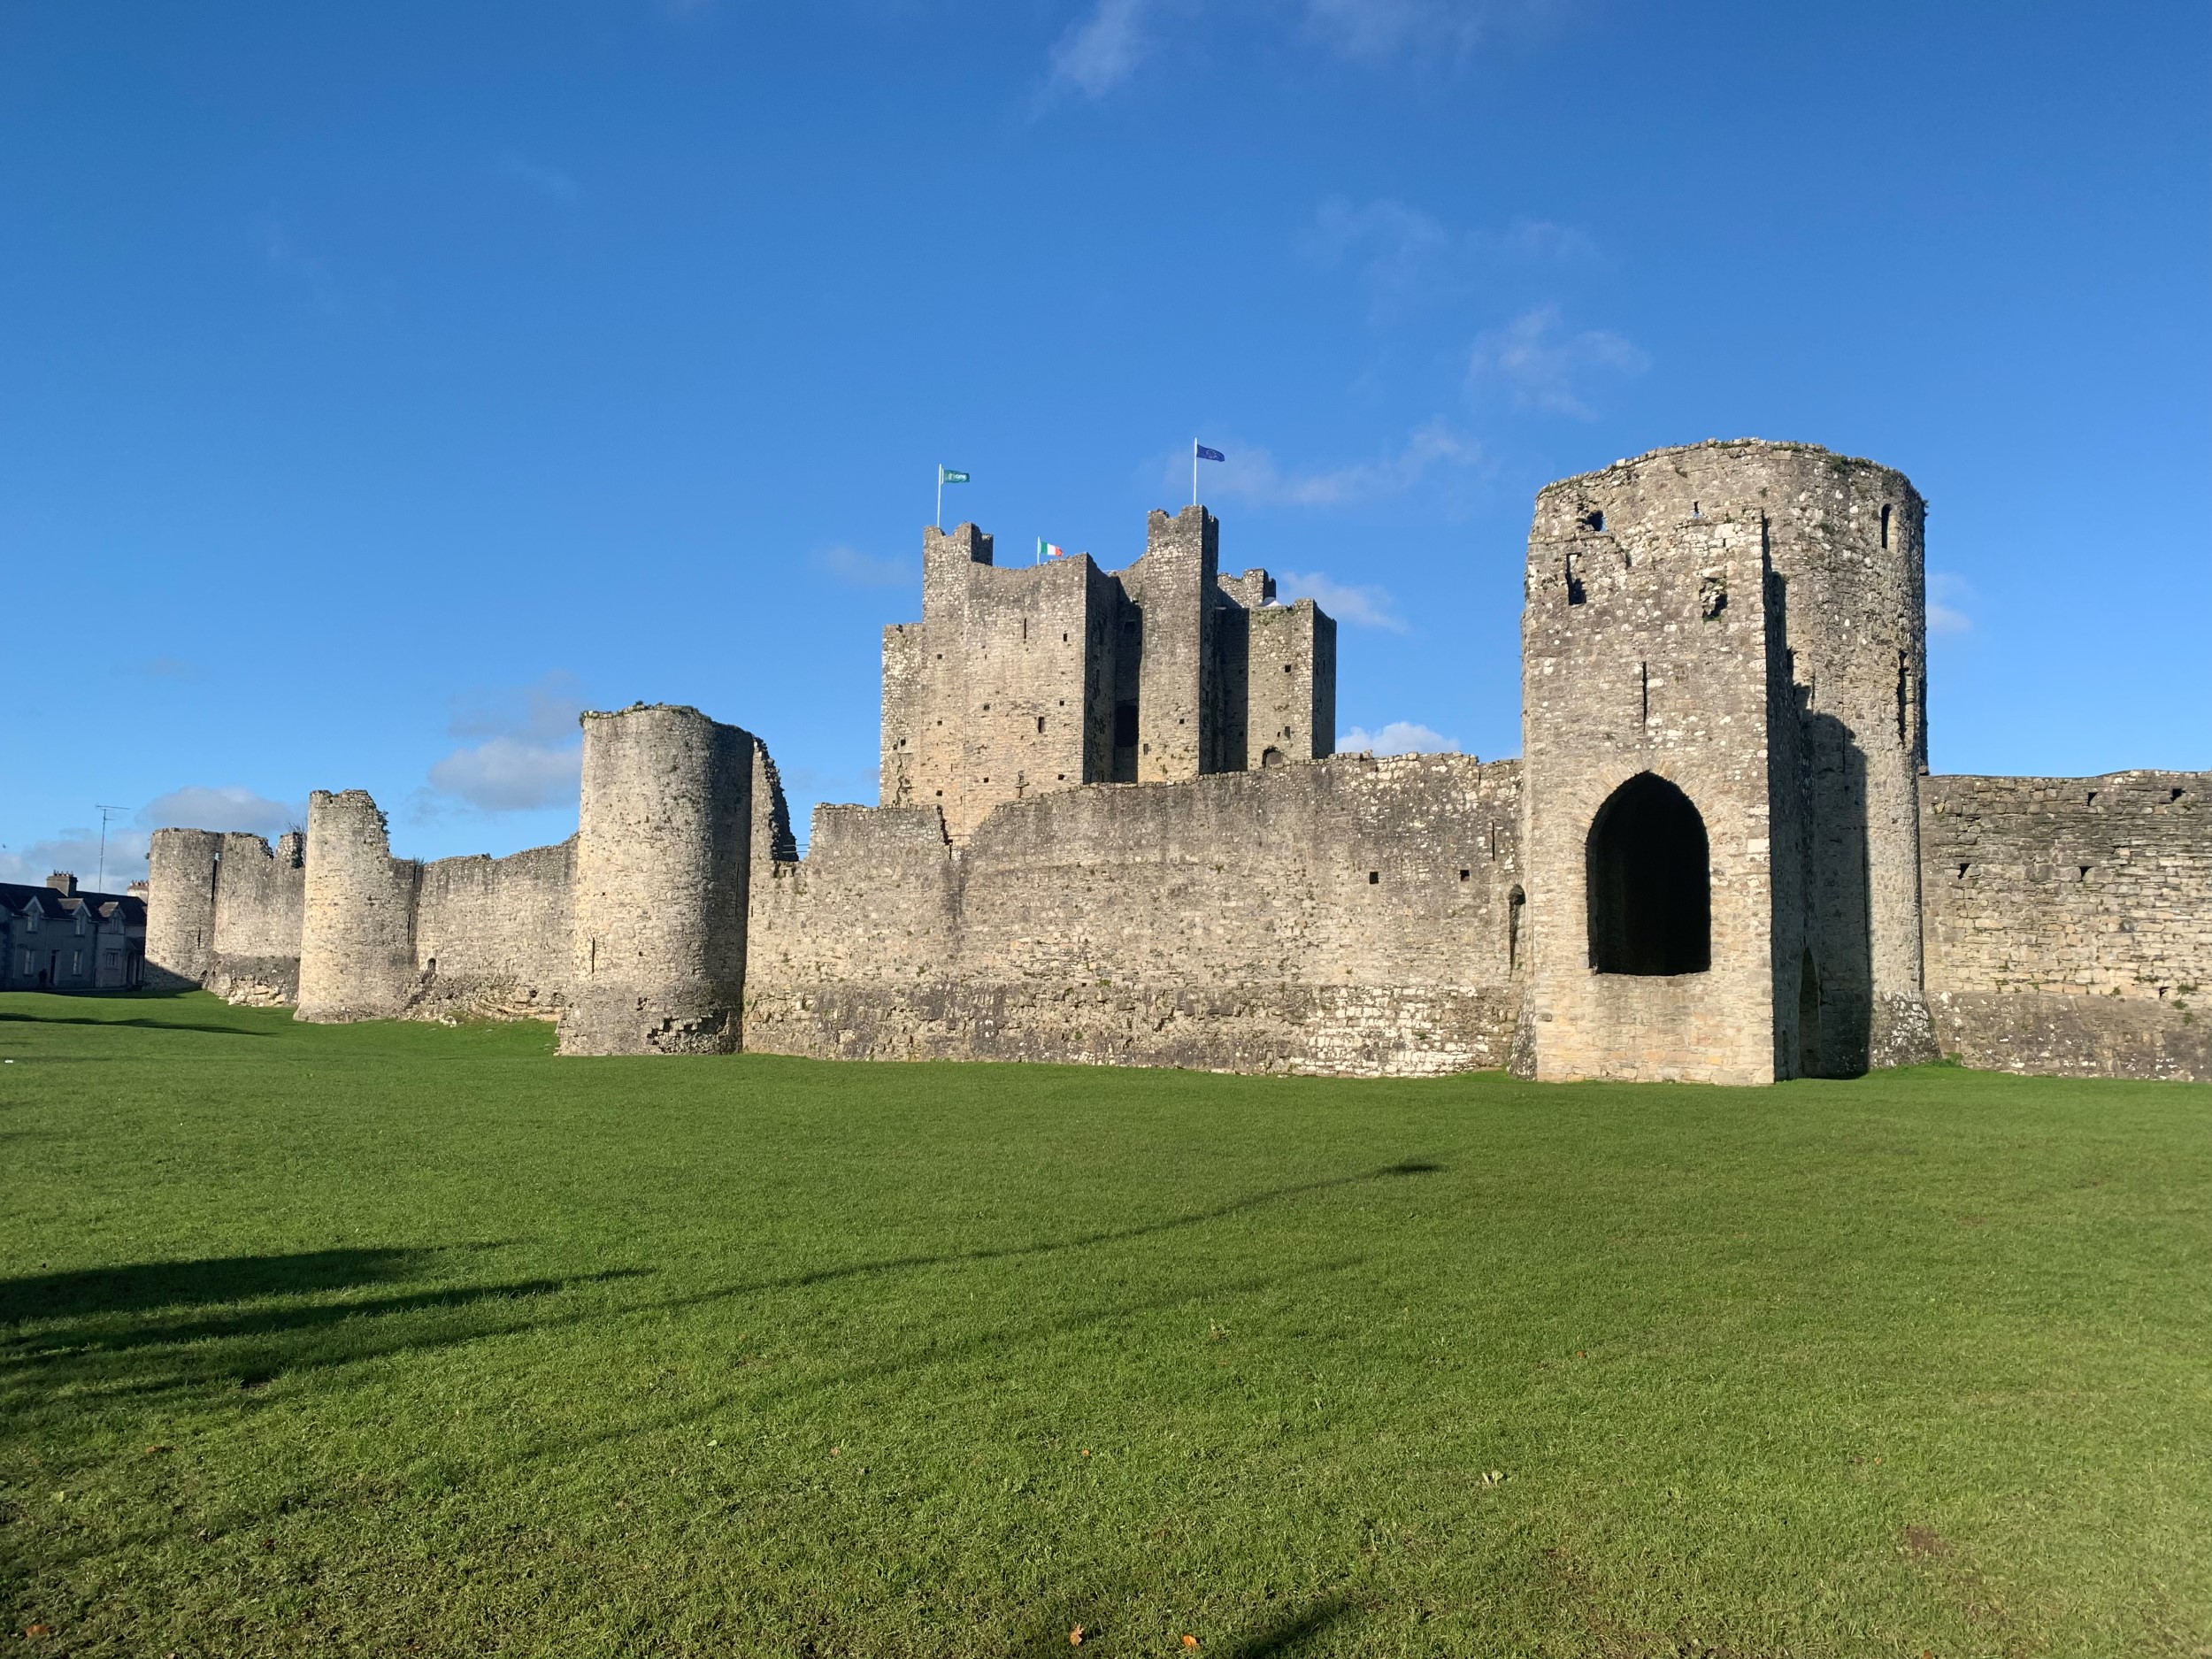 Trim Castle - ancient ruins are part of life in Ireland